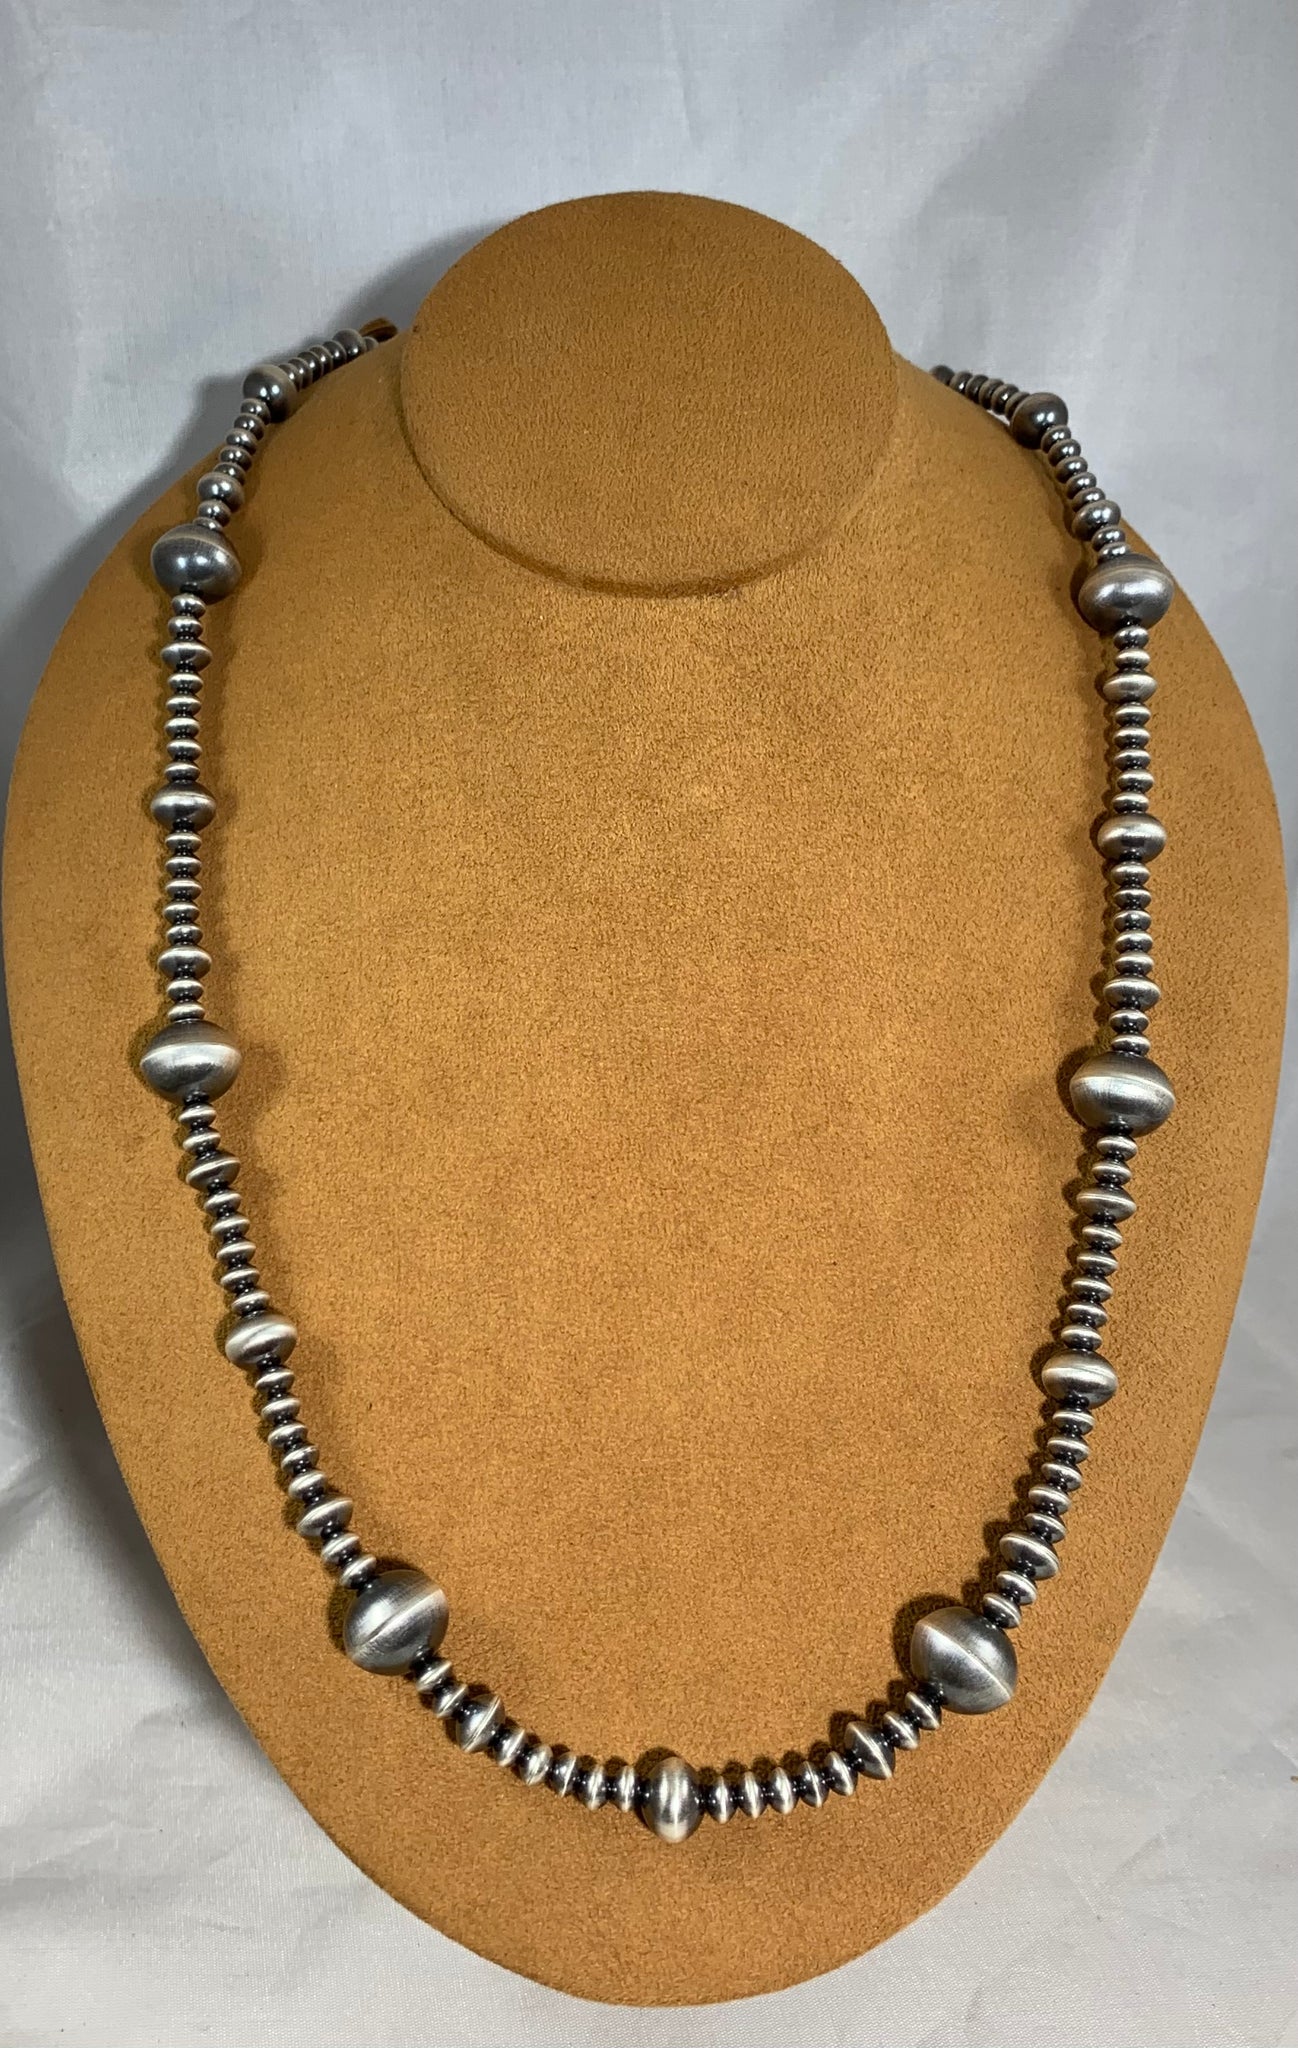 Navajo Rope Bead Necklace by Veltenia Haley